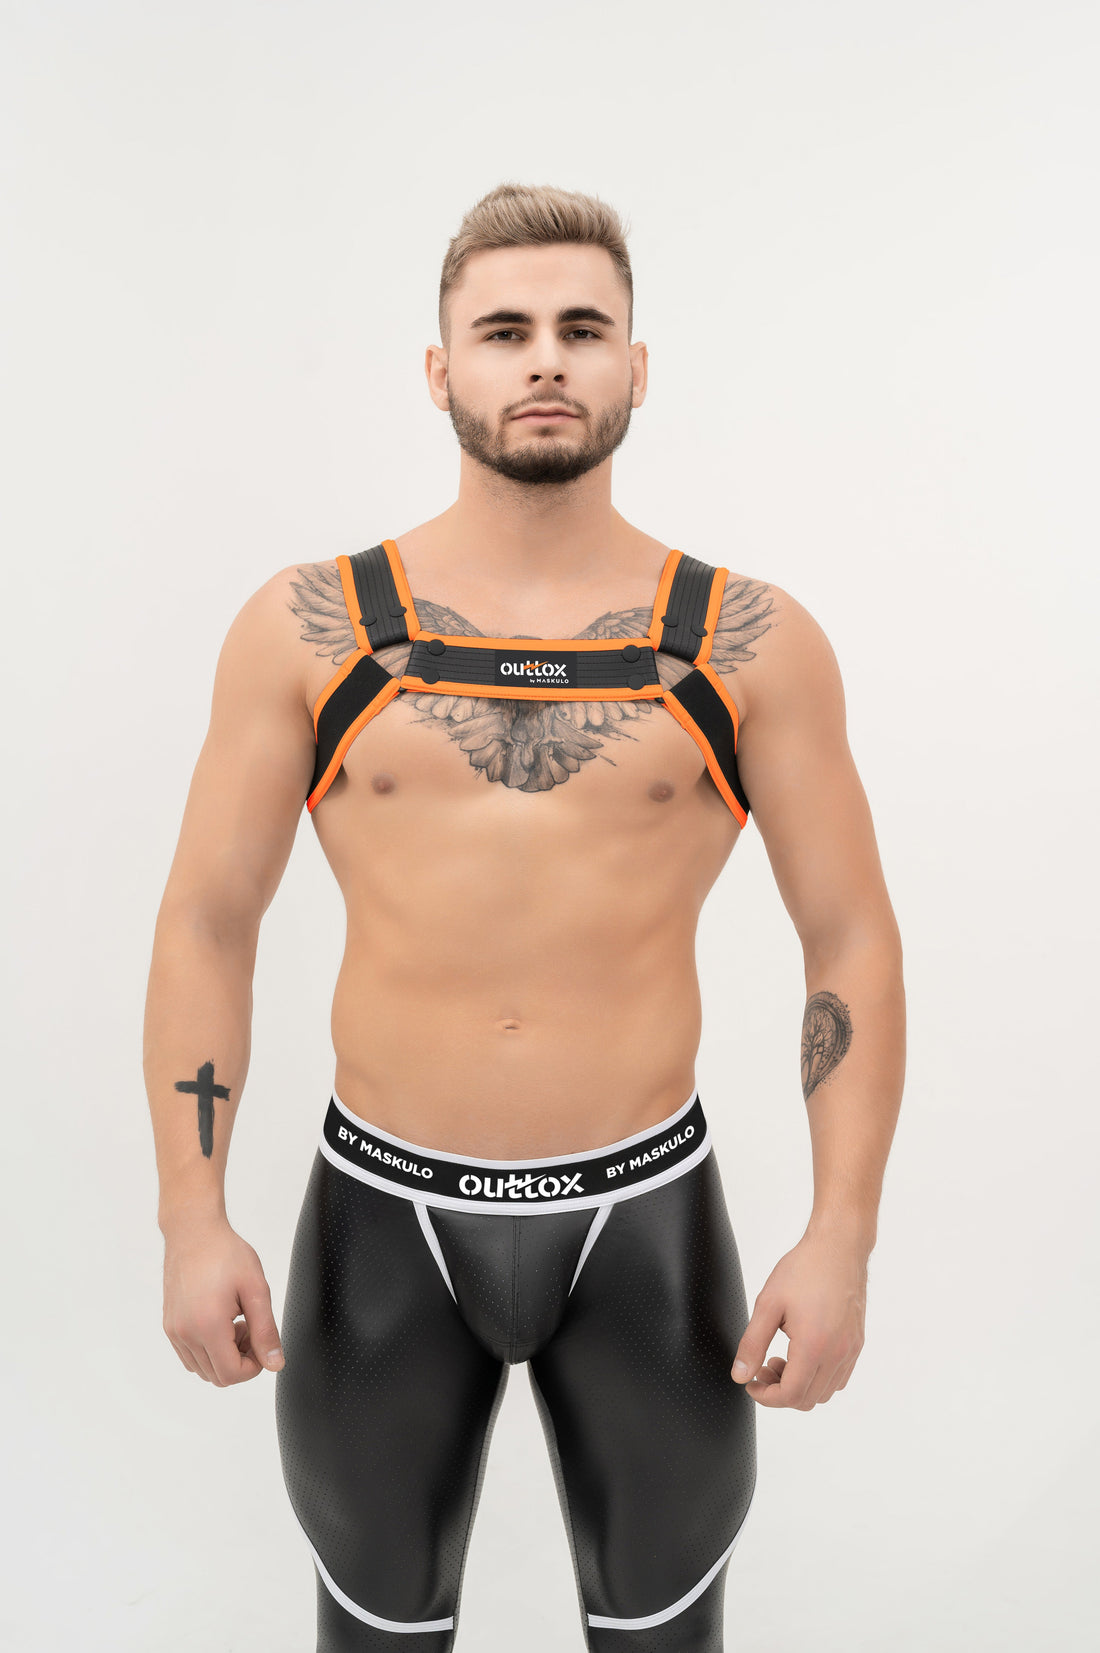 Outtox. Bulldog Harness with Snaps. Orange &